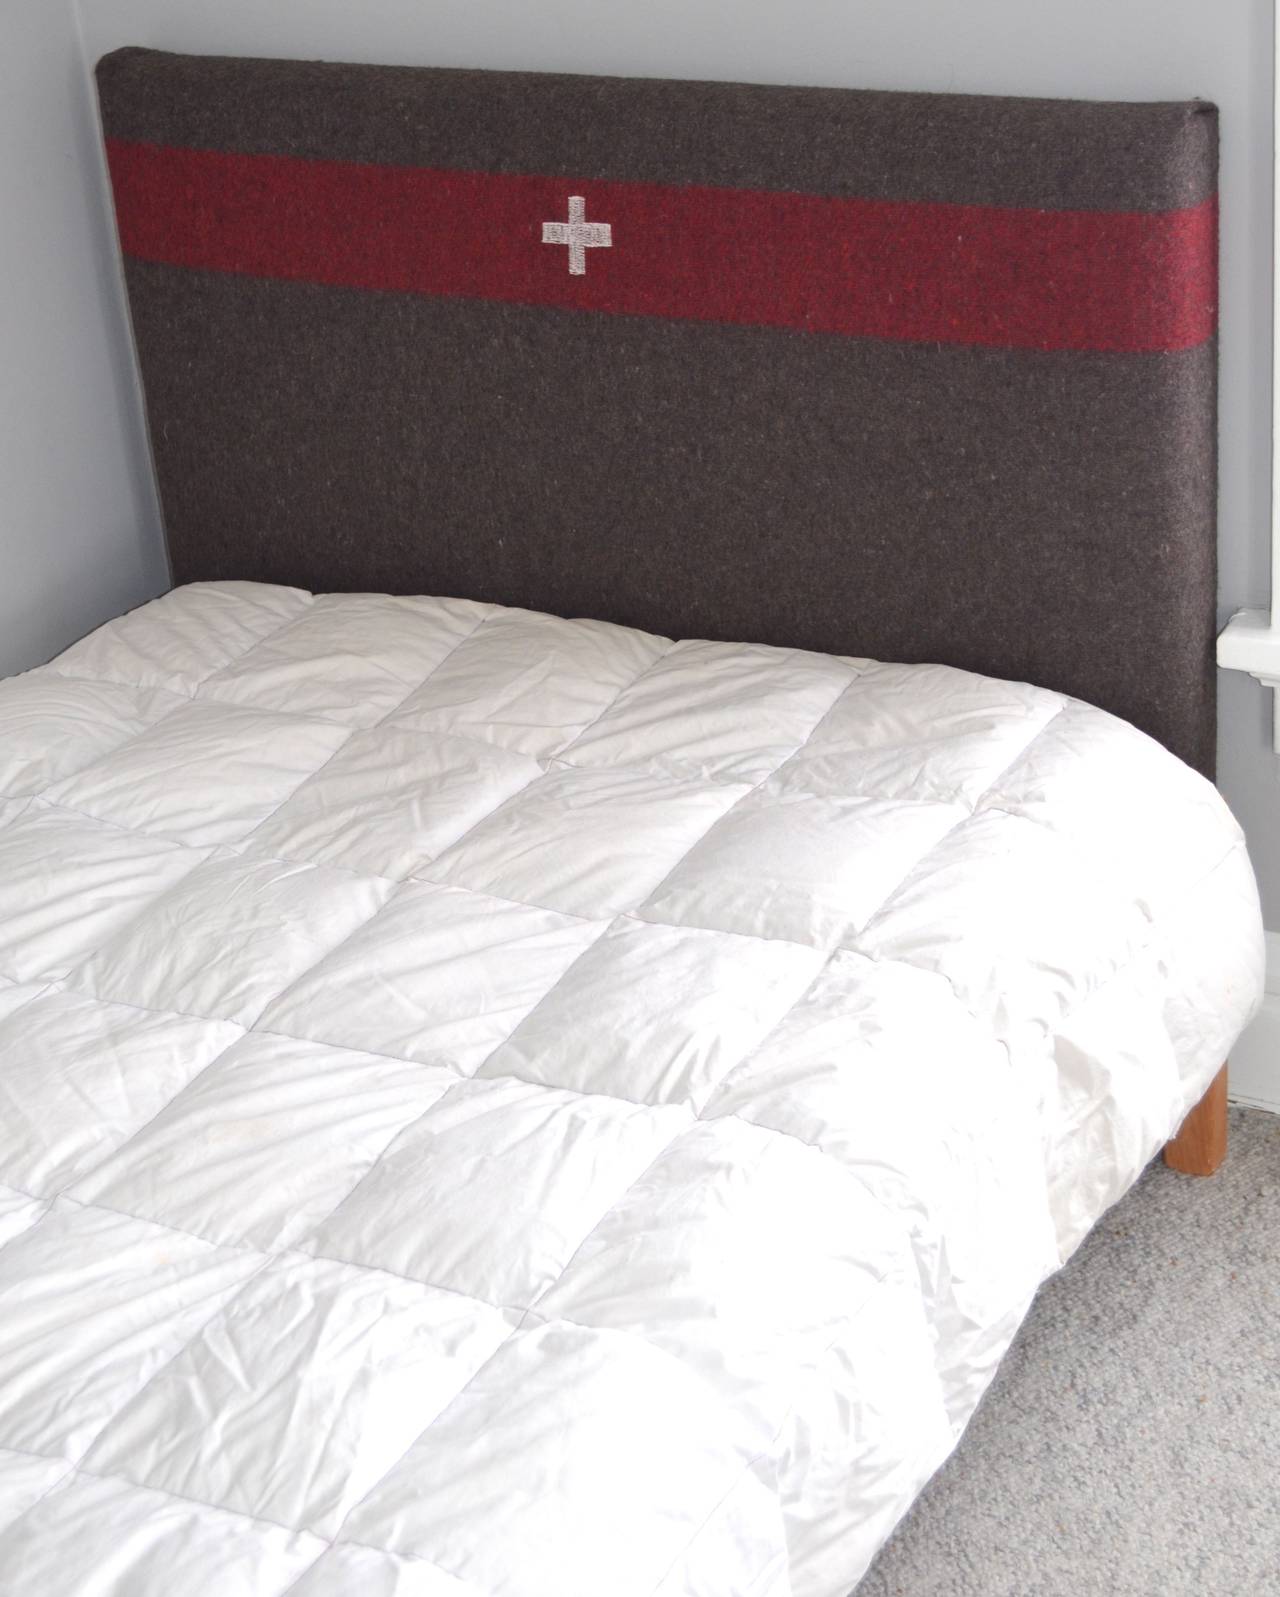 Twin headboard has been upholstered in wool Swiss army blanket from Europe, circa 1960. Headboard is easily installed on the wall behind the bed frame at whatever height is desired.